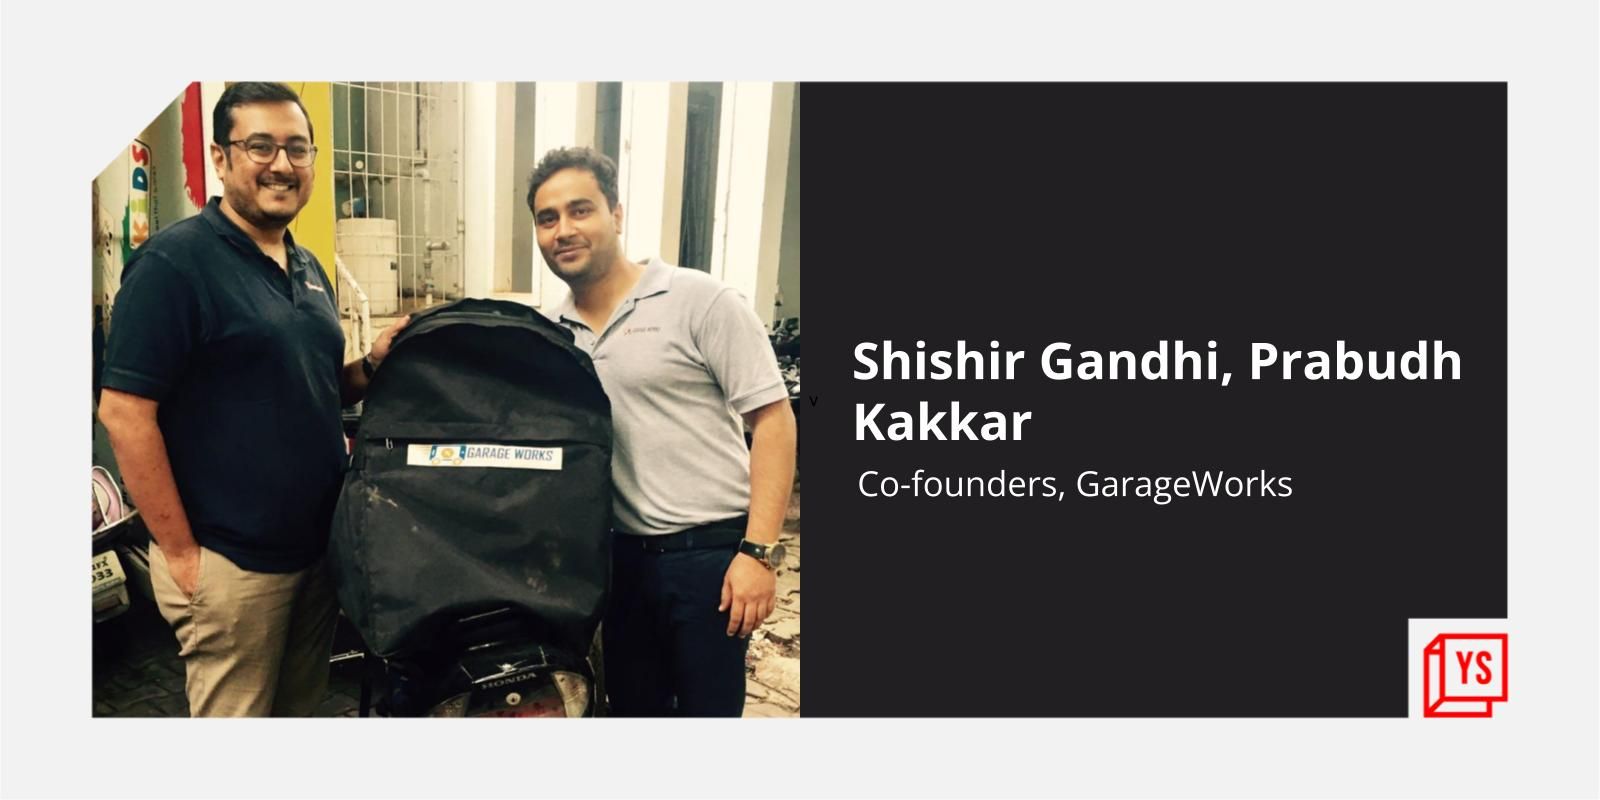 This B2C startup provides doorstep repair and maintenance services for two-wheelers 